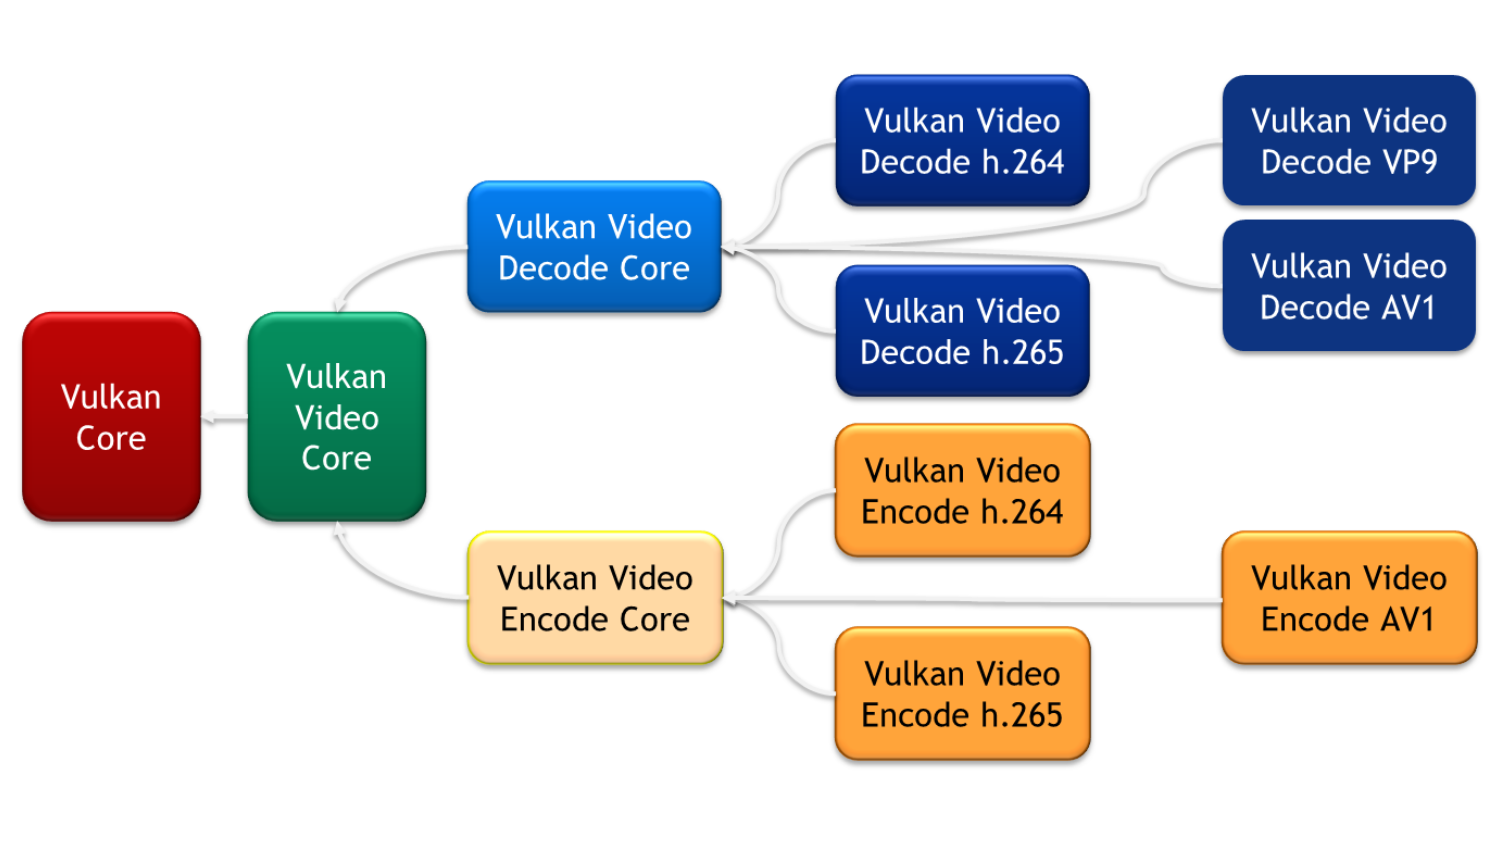 Graphic of Vulkan Video architecture